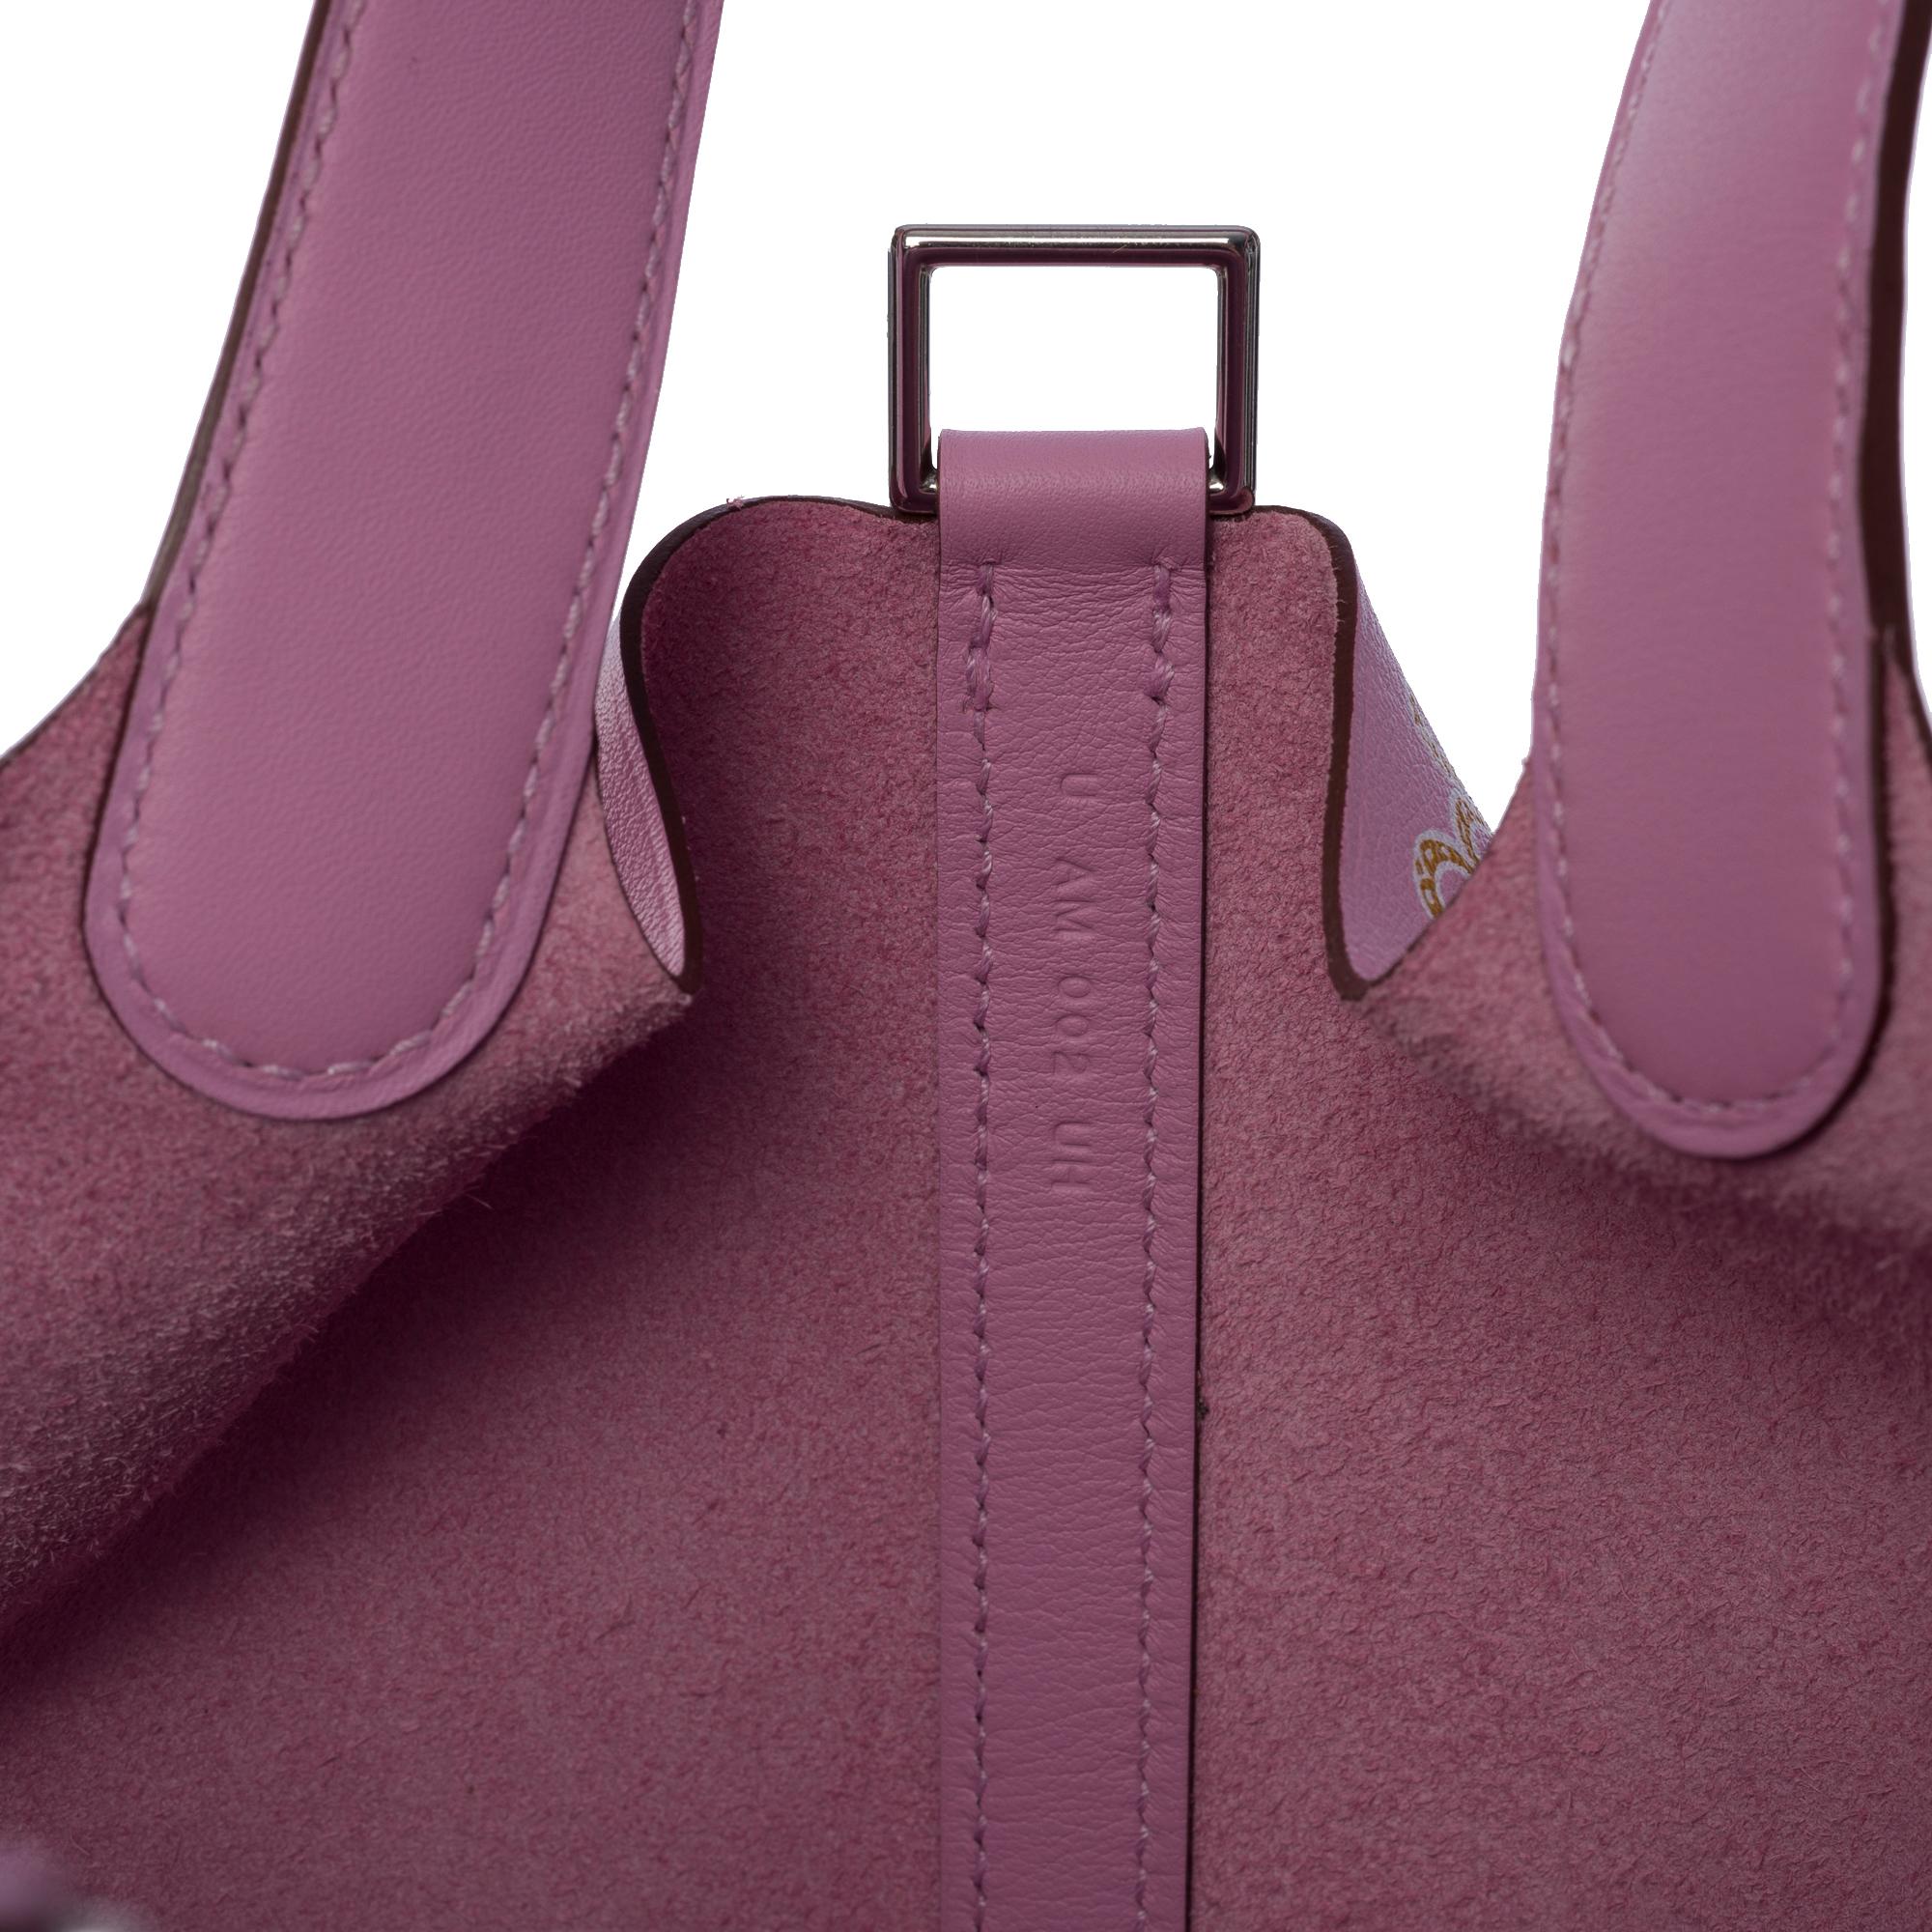 New Hermès Picotin 18 Lucky Daisy limited edition in Mauve Sylvestre Swift, SHW For Sale 3